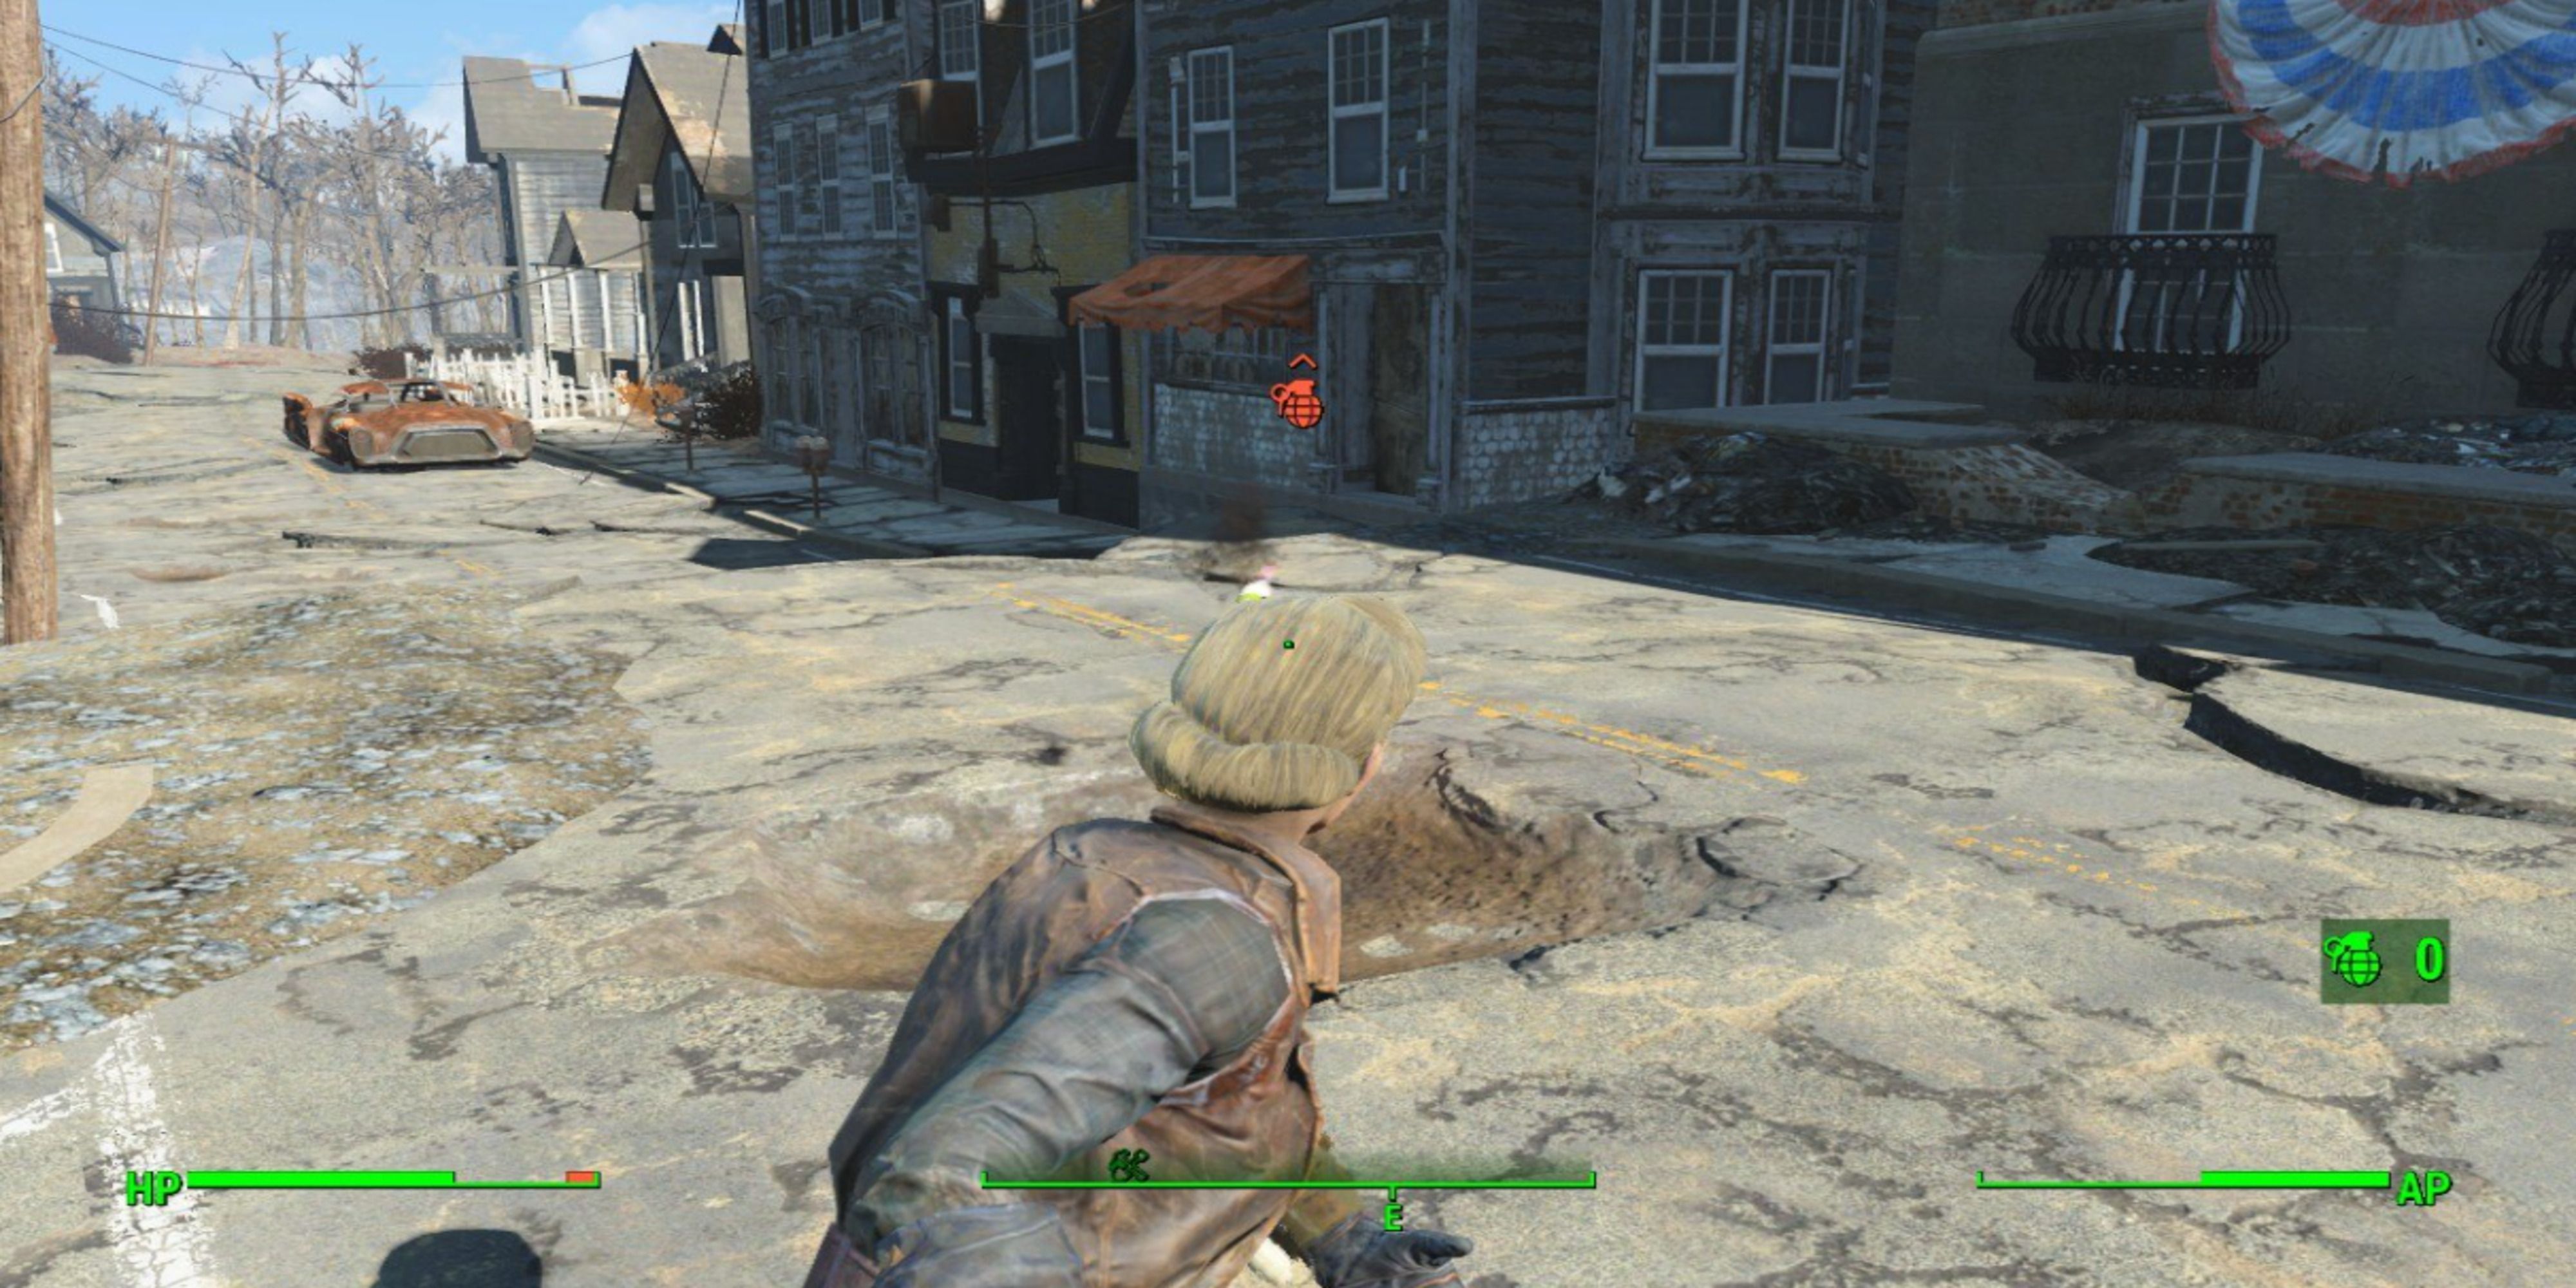 Throwing a grenade at an enemy in Fallout 4